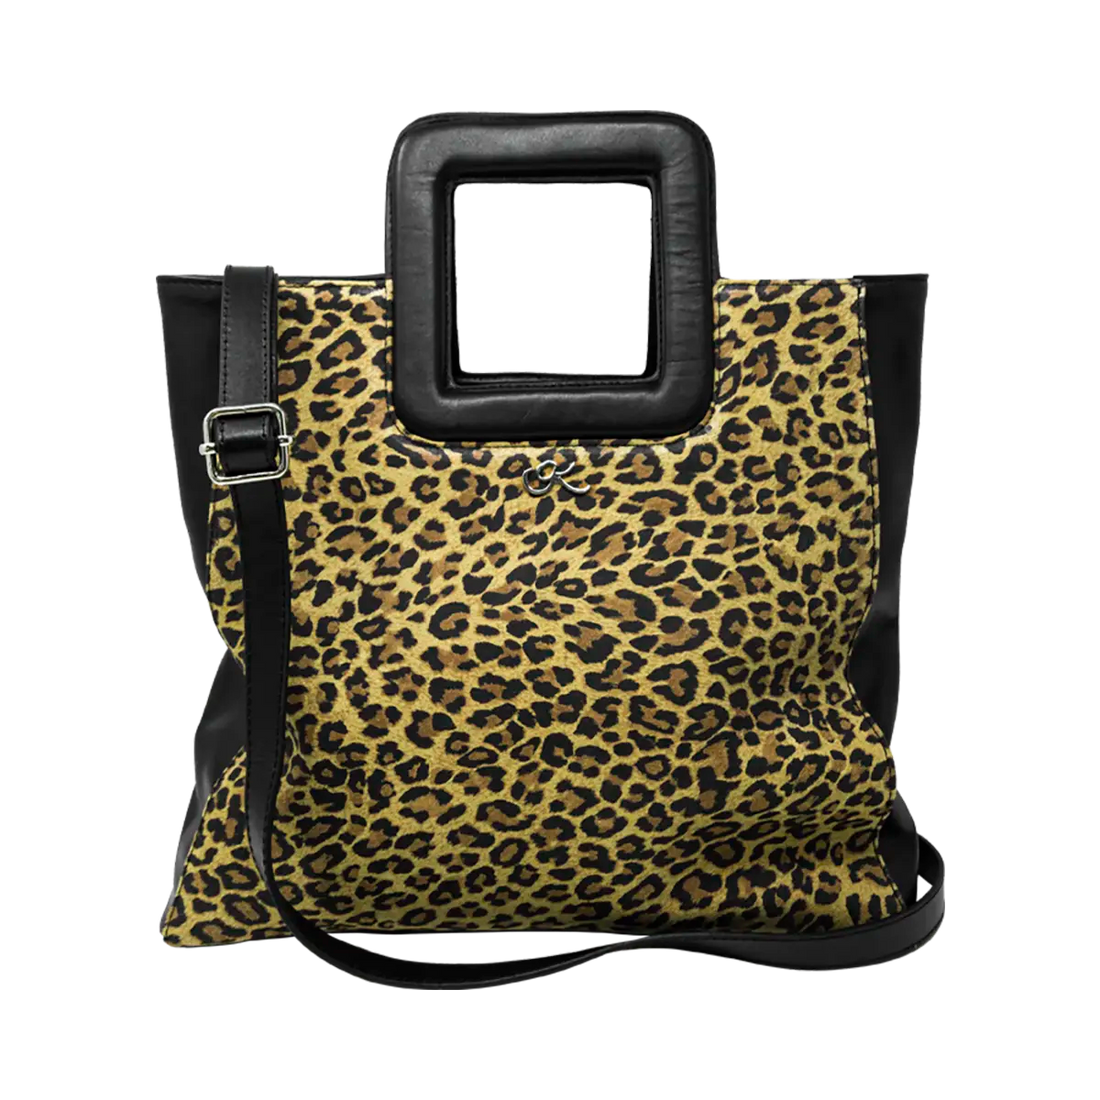 large black animal print leather print handbag with a square handle. Accessory for women in San Diego, CA.